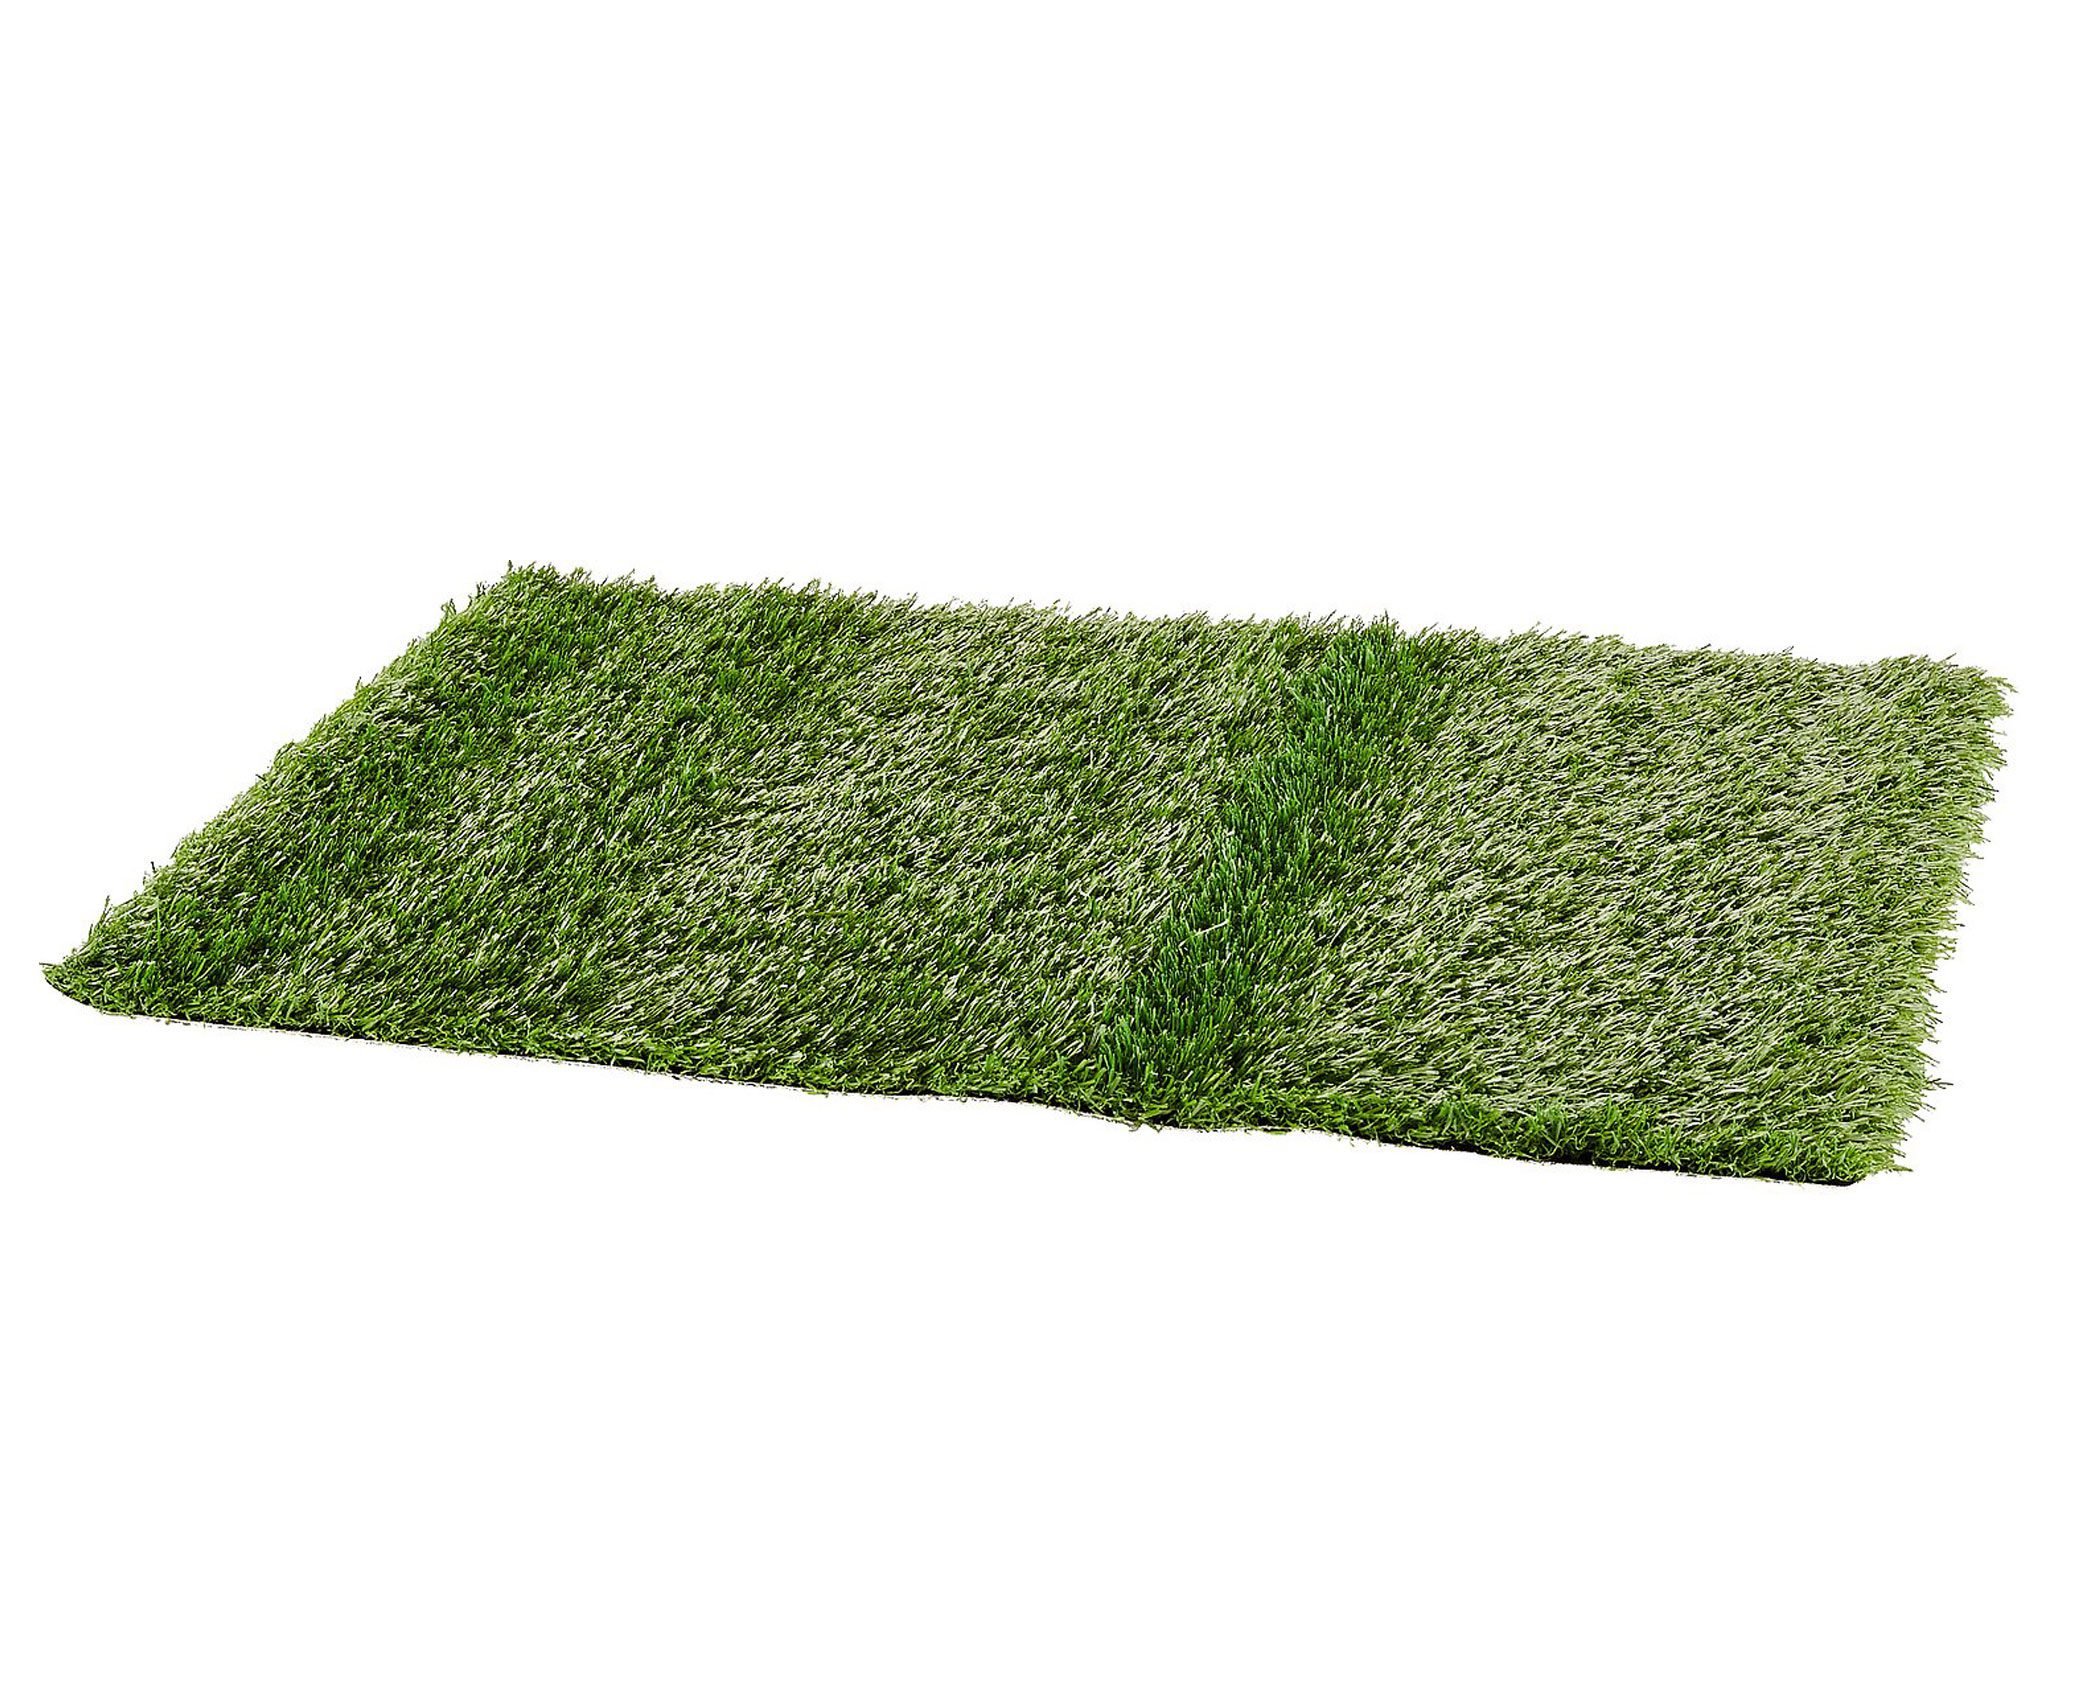 Wholesale artificial turf